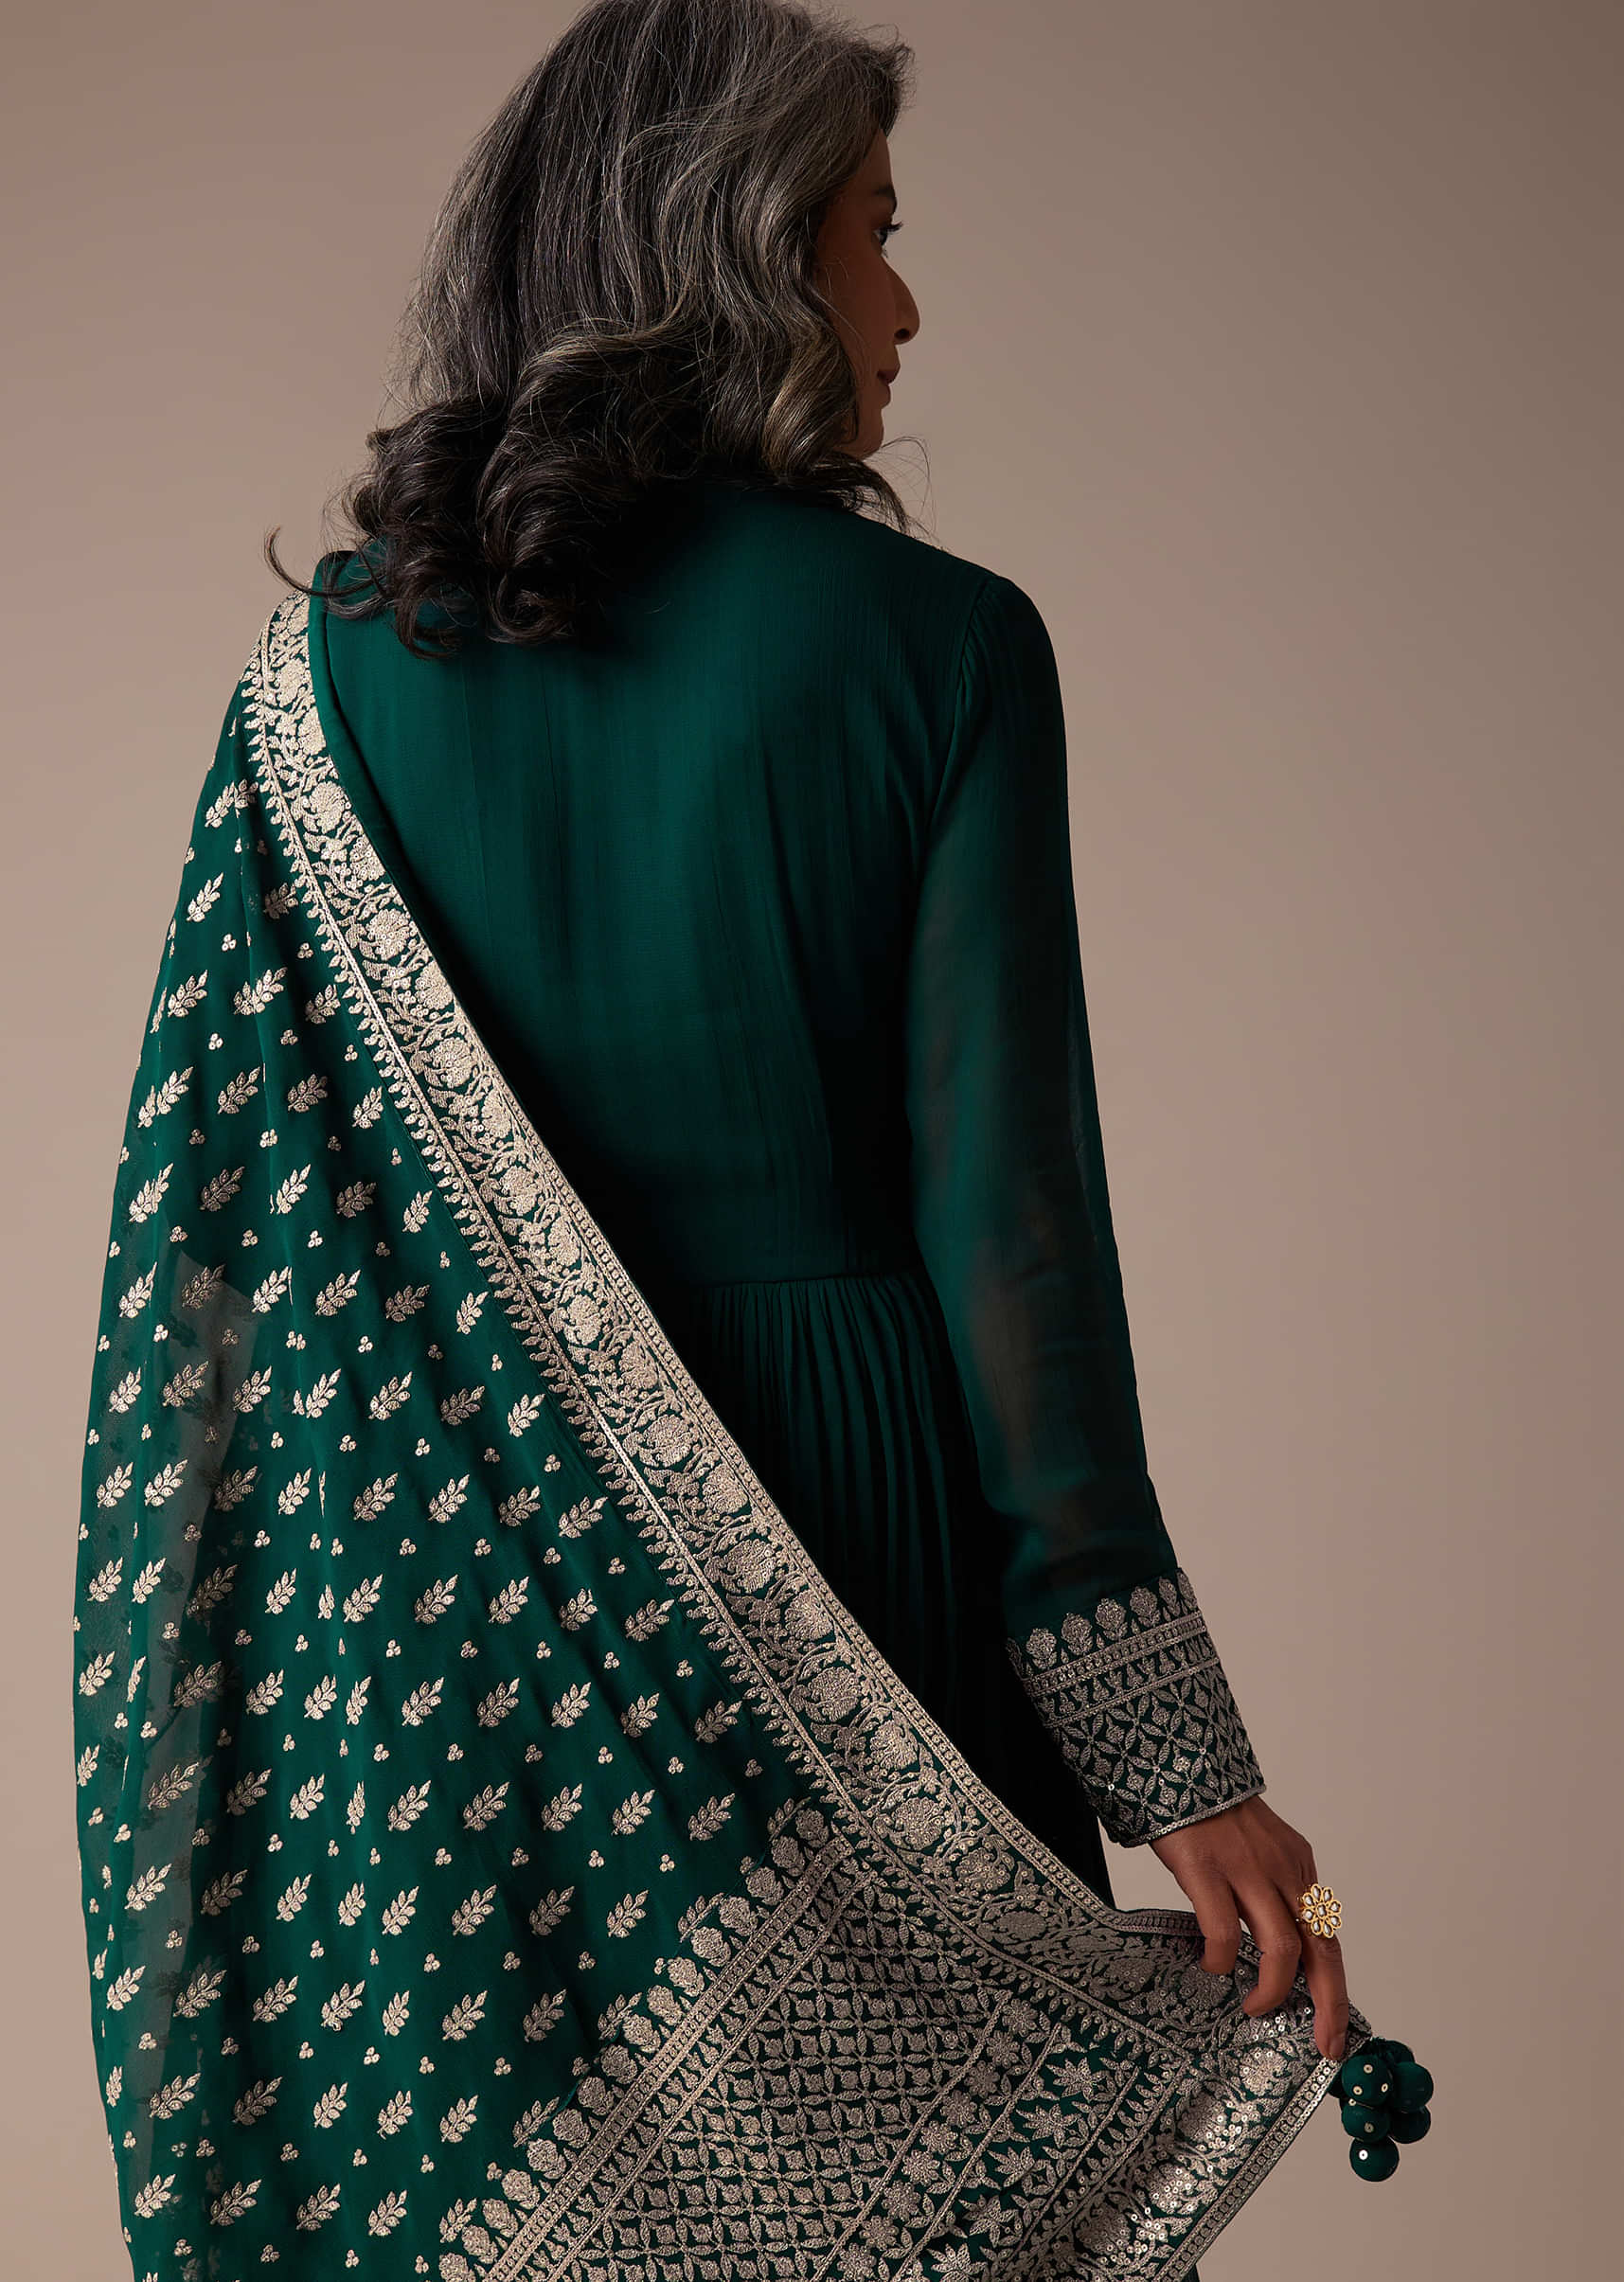 Teal Green Anarkali Suit In Georgette With Zardozi And Zari Embroidery Work